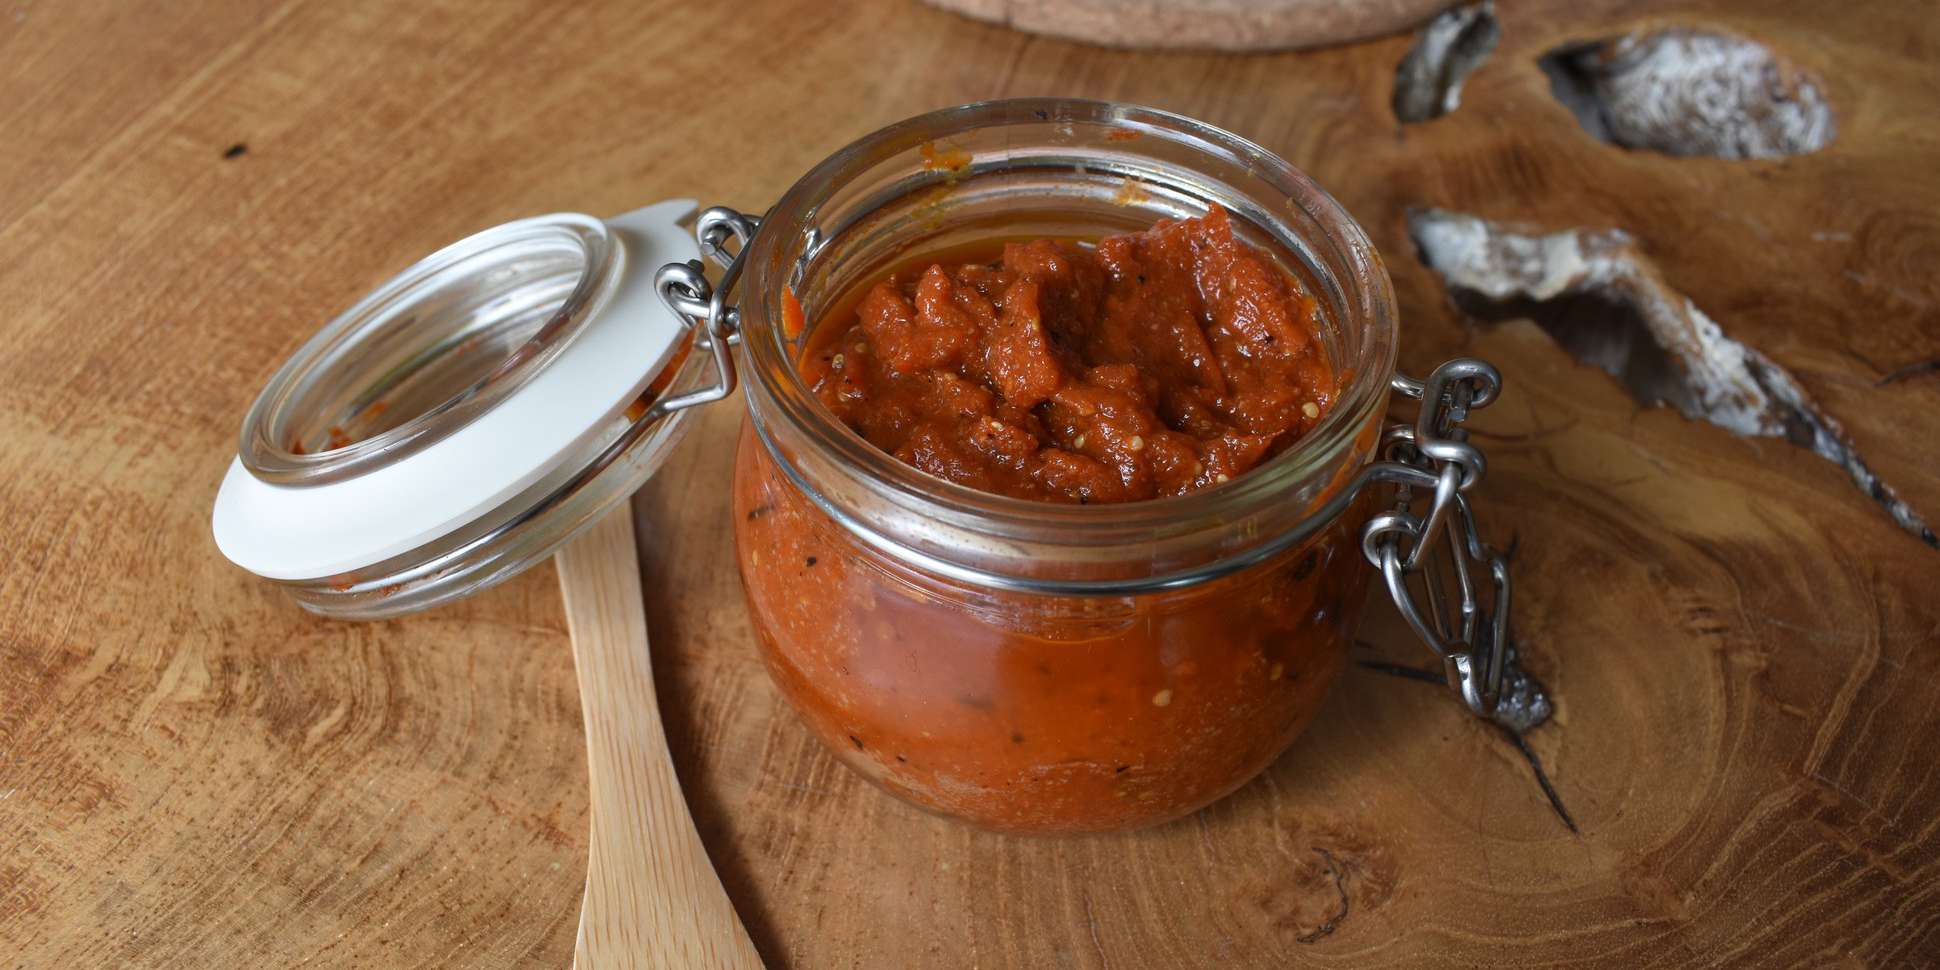 Roasted Red Pepper and Goji Sauce/Dressing